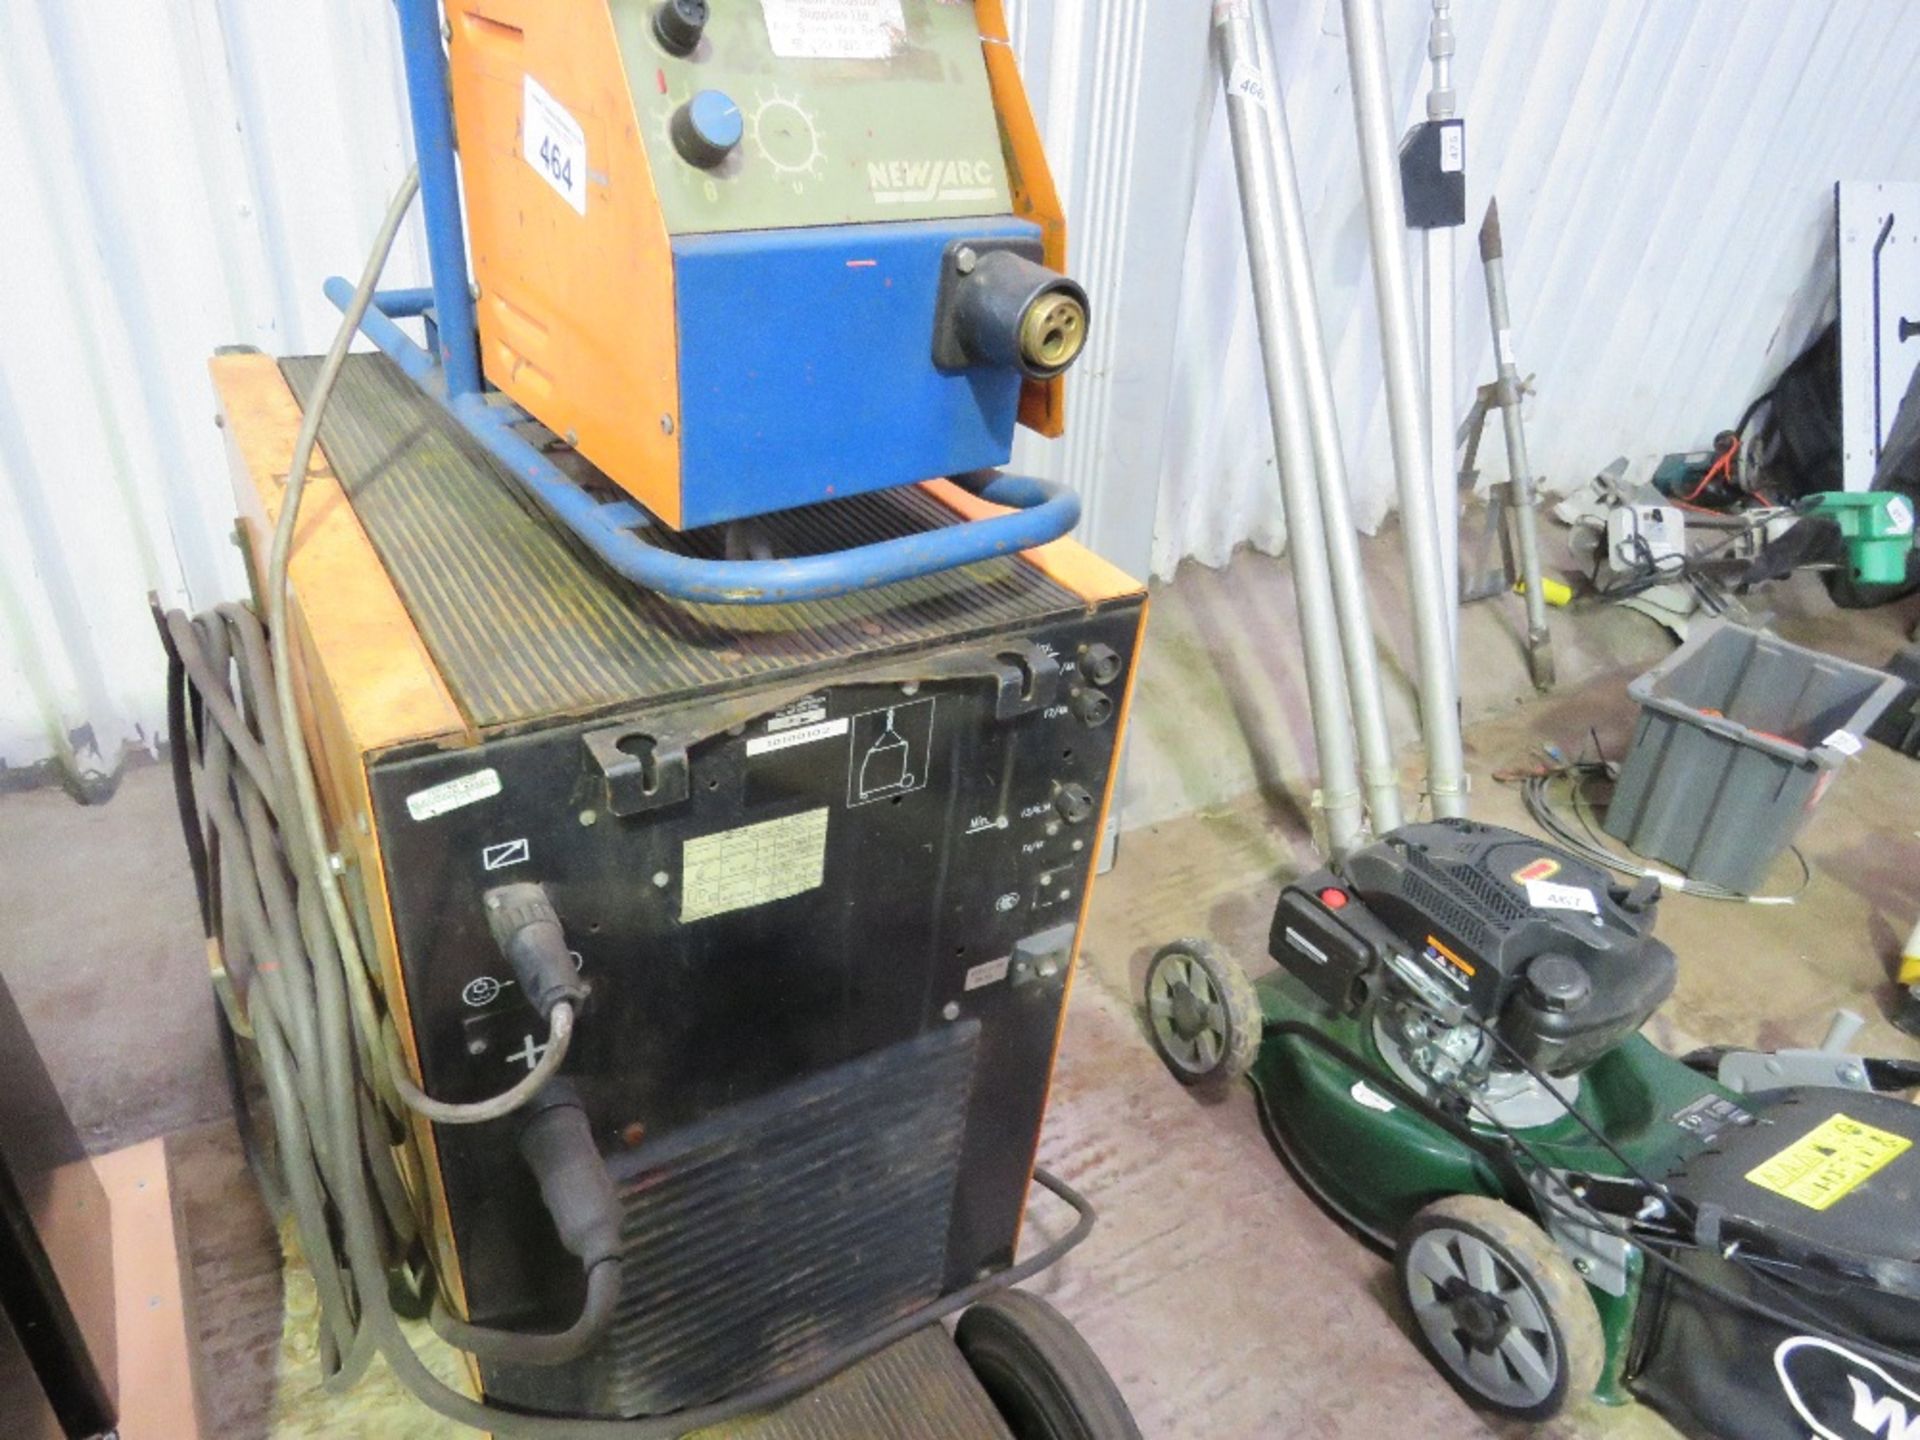 NEWARC MIG WELDER WITH WIRE FEED HEAD. - Image 5 of 6